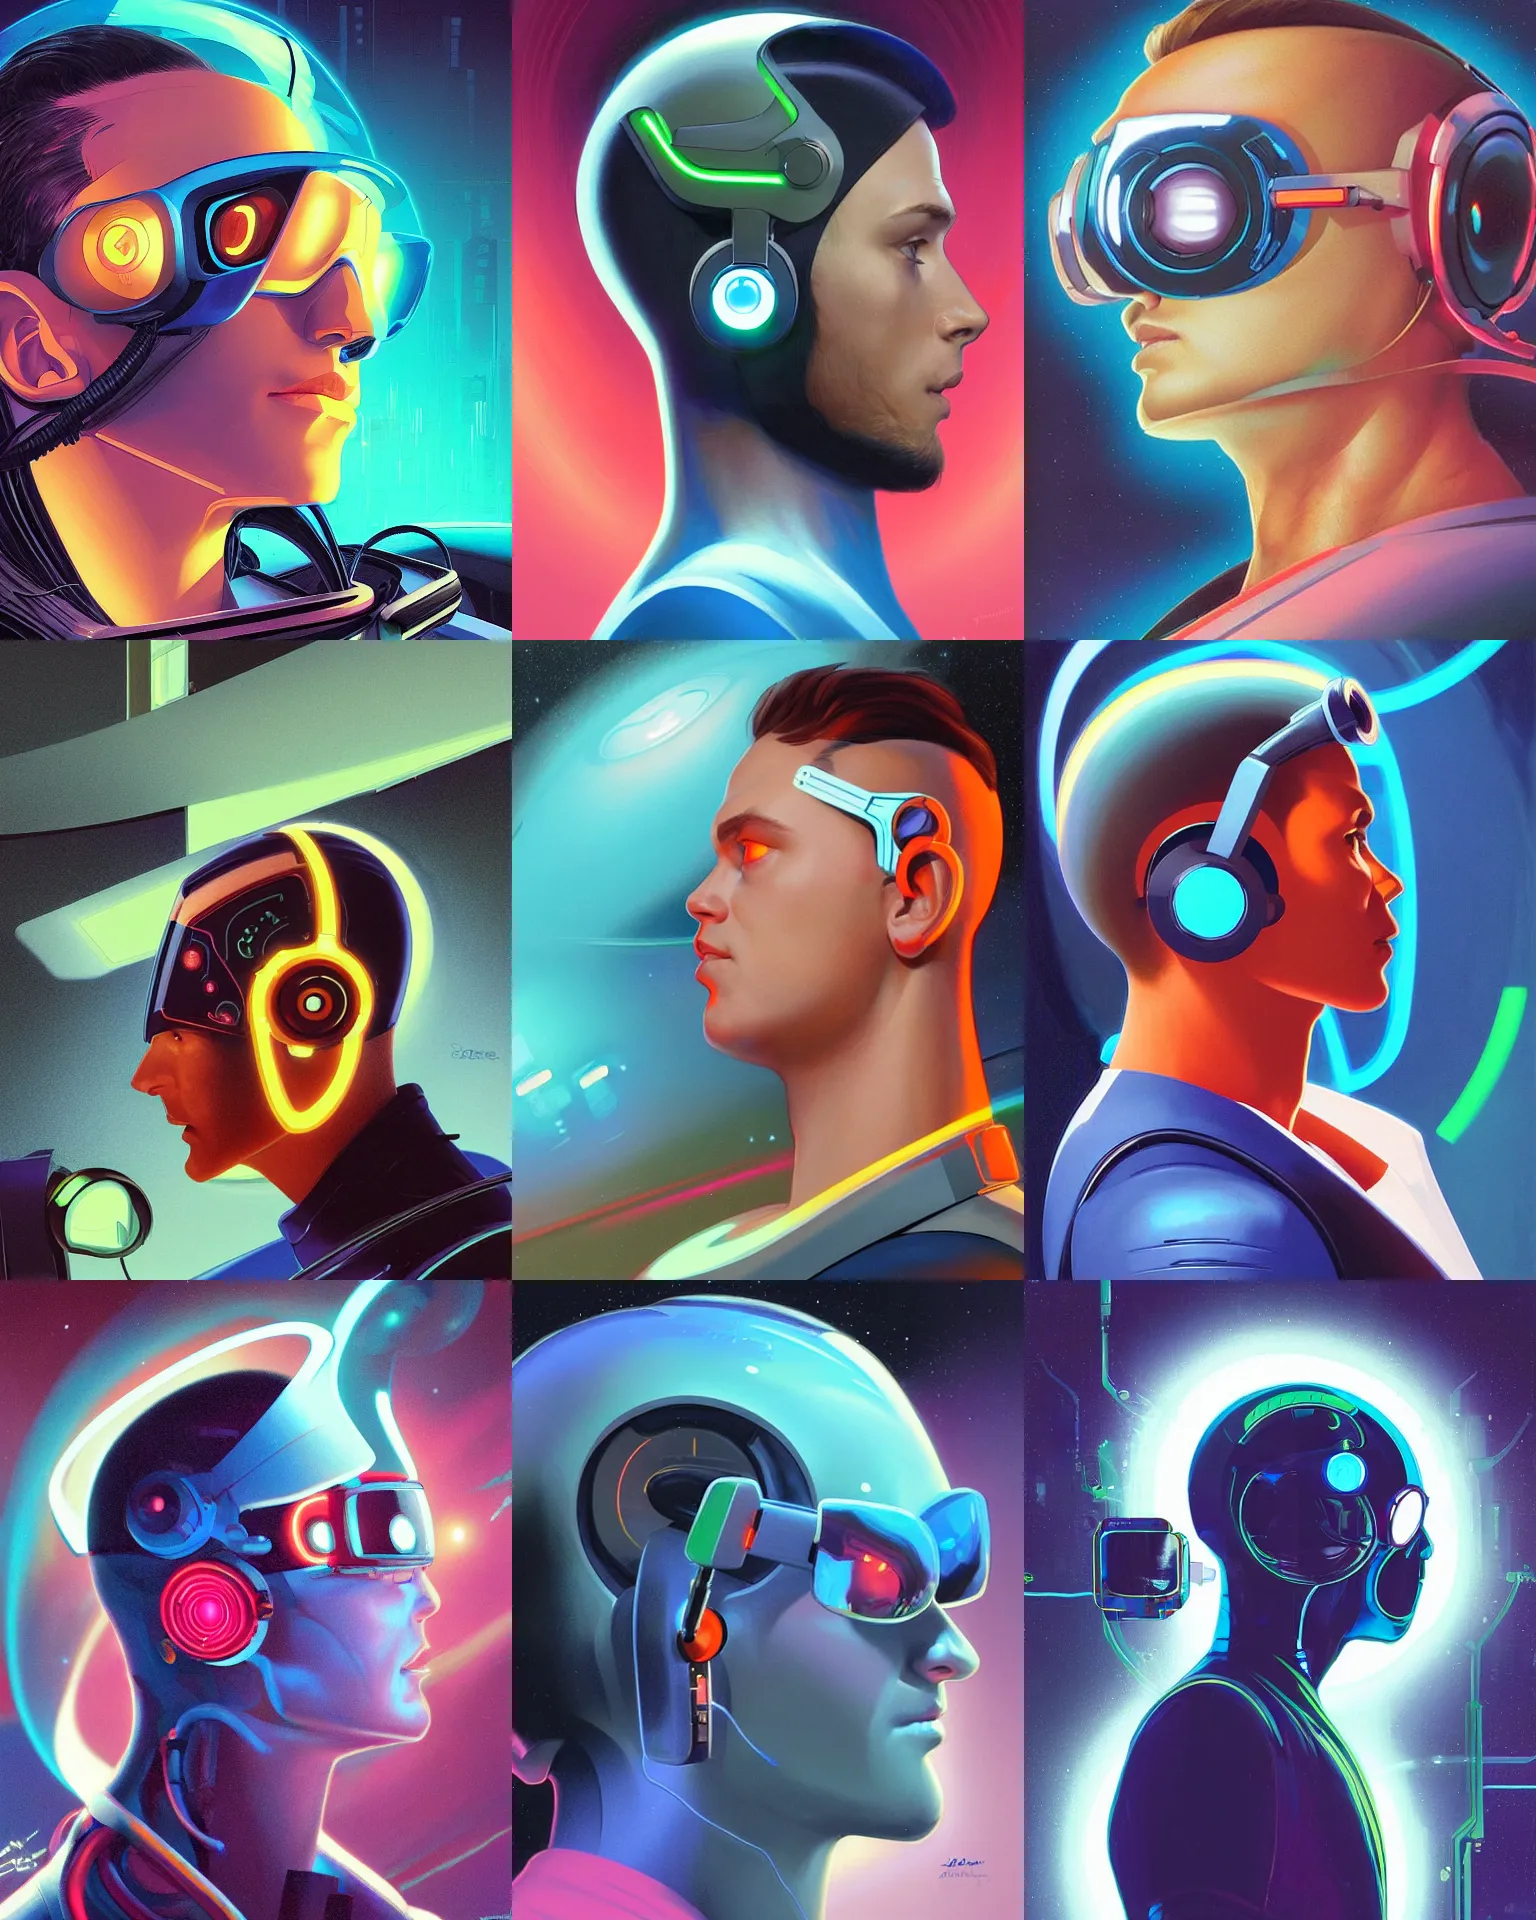 Prompt: profile side view of a future coder man looking on, sleek cyclops display over eyes and sleek bright headphoneset, neon accent lights, holographic colors, desaturated headshot portrait digital painting by dean cornwall, rhads, john berkey, tom whalen, alex grey, alphonse mucha, donoto giancola, astronaut cyberpunk electric